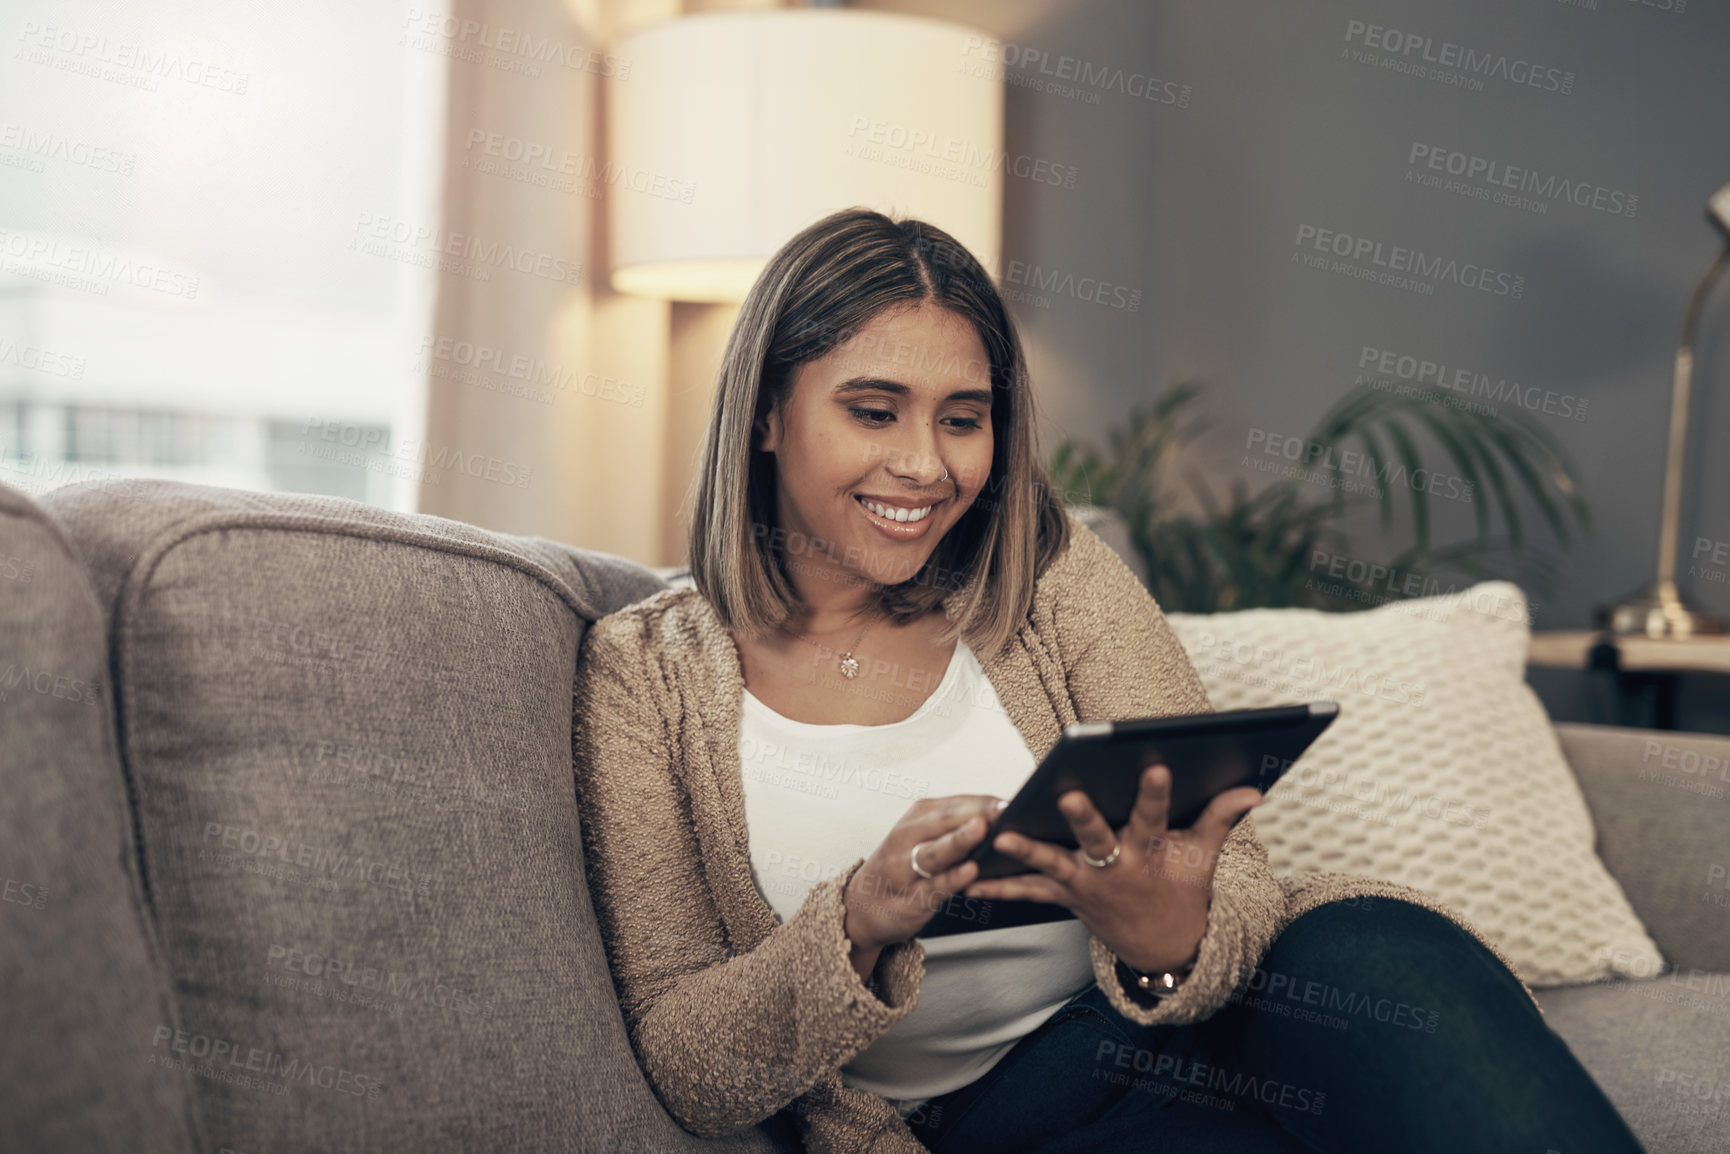 Buy stock photo Shot of a young woman using a digital tablet on the sofa at home